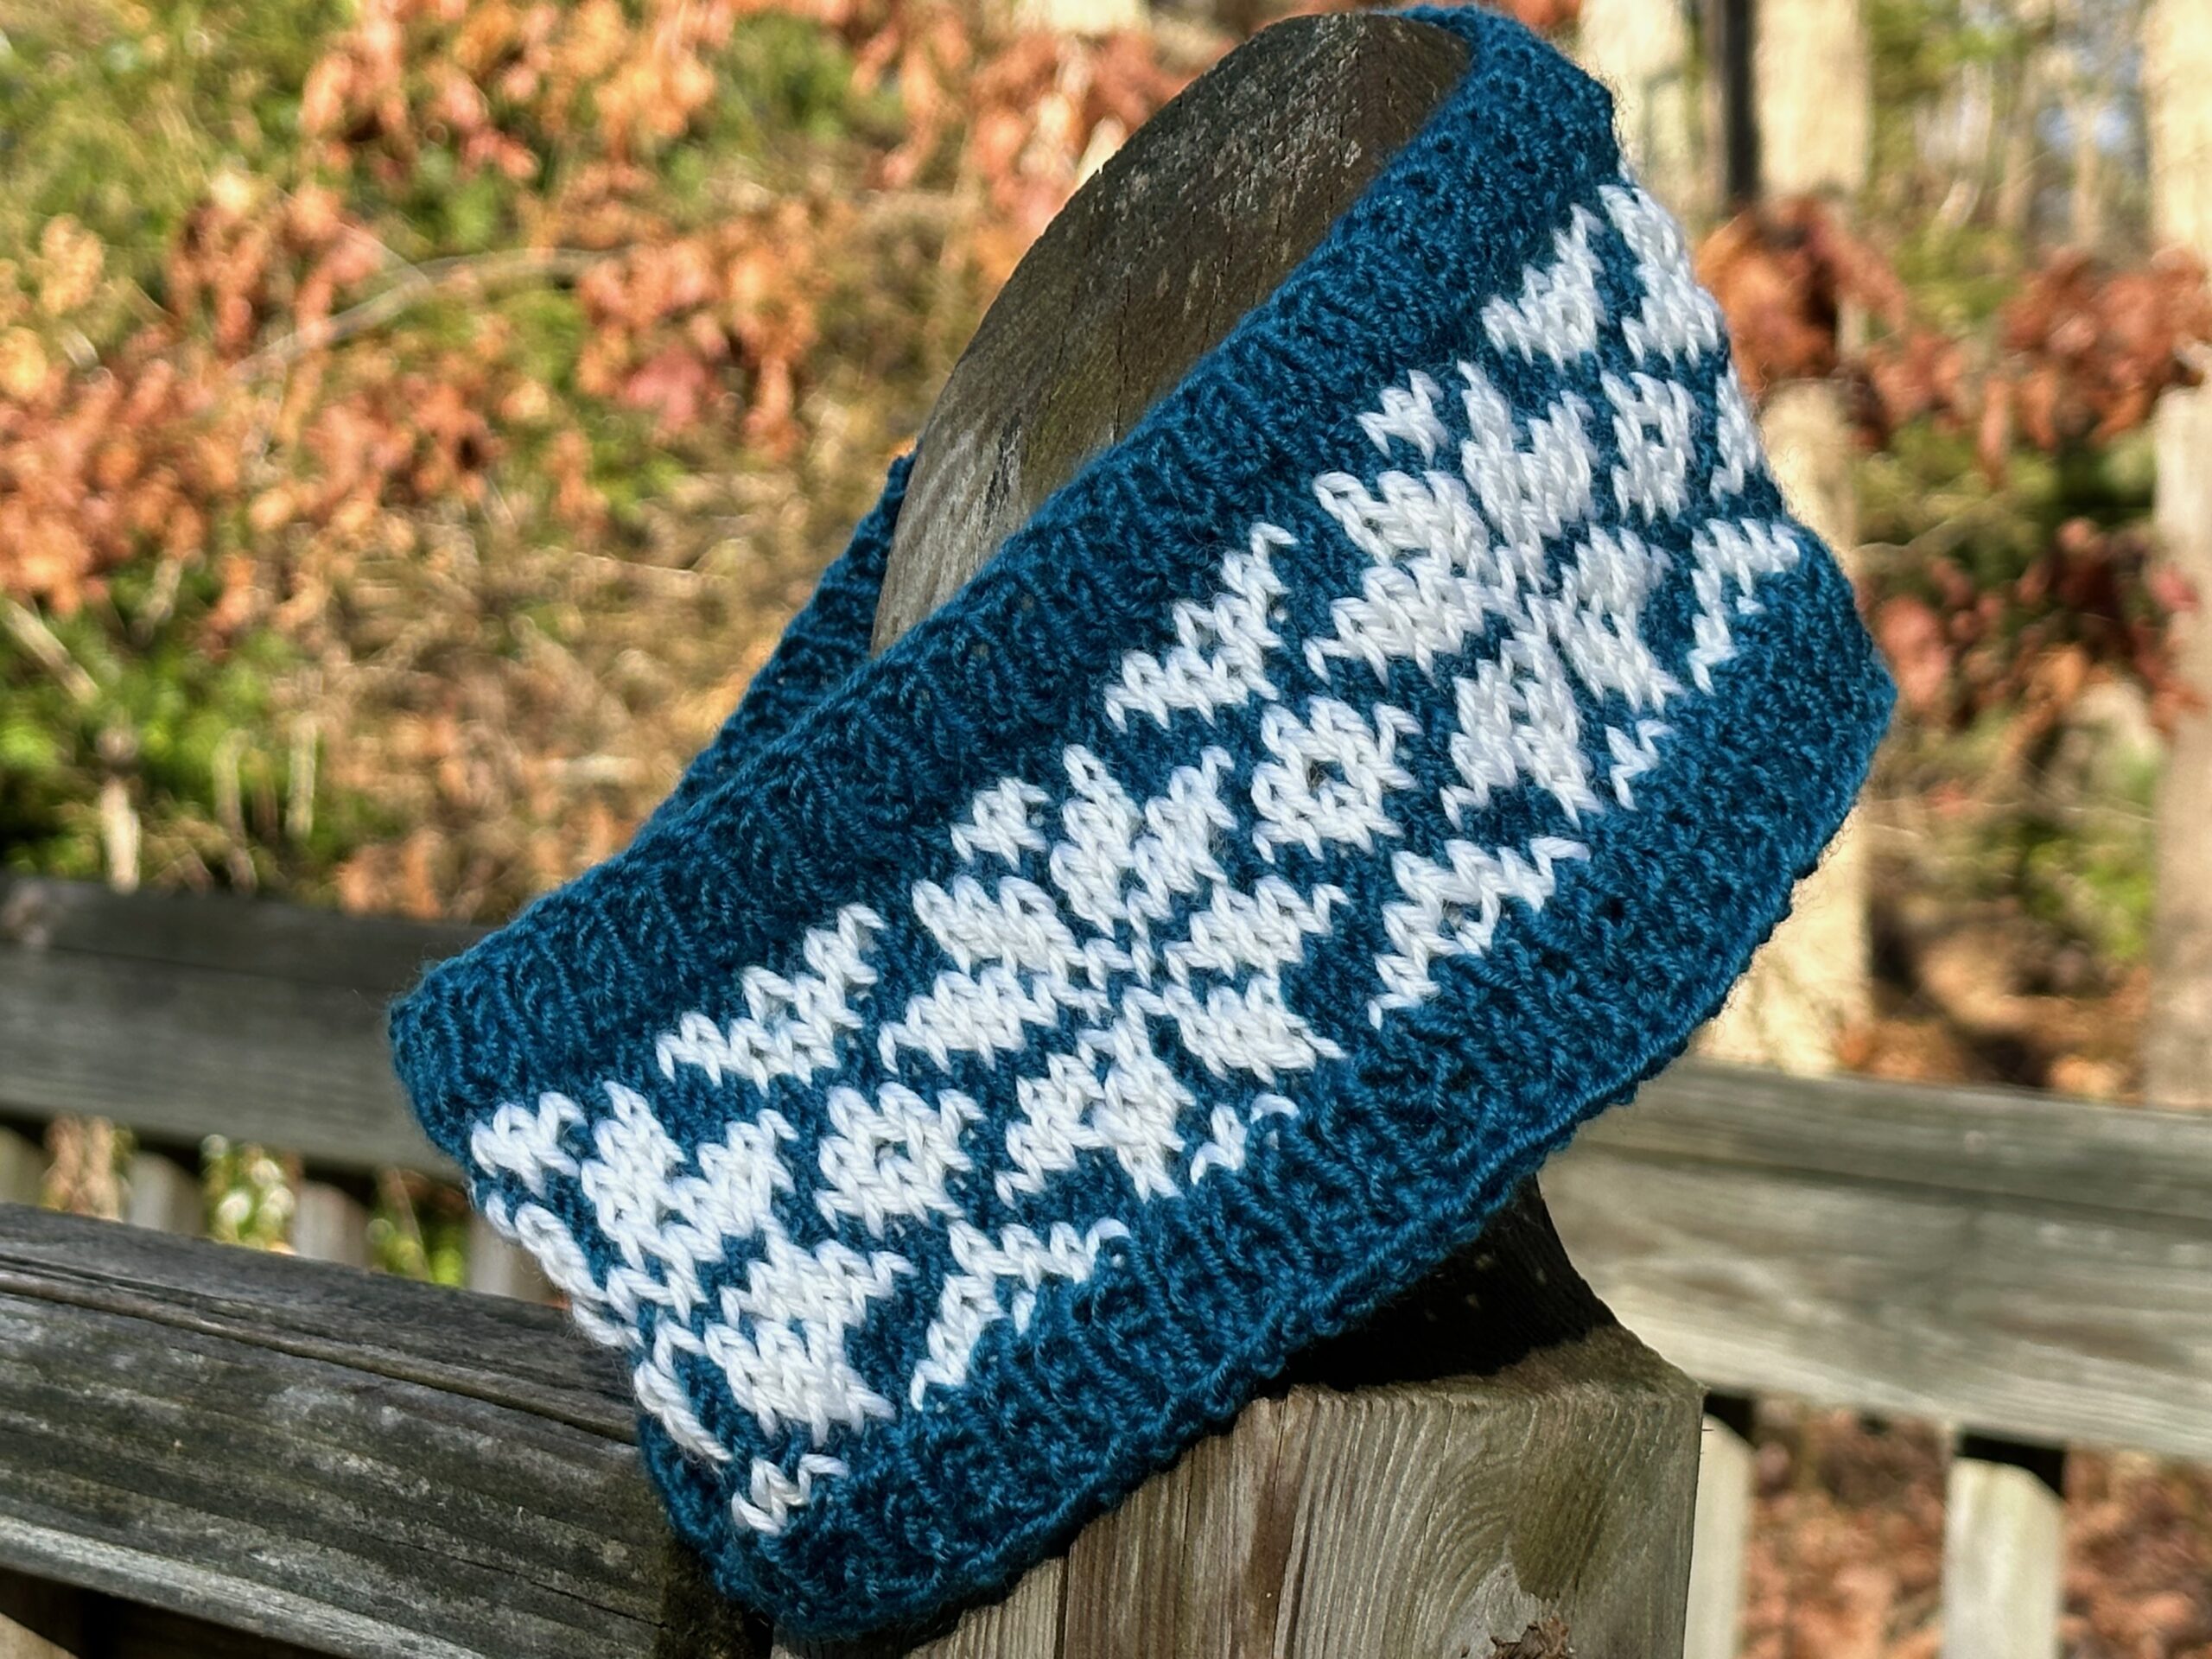 A photo of hand knitted stranded colorwork ear warmers on a fencepost.